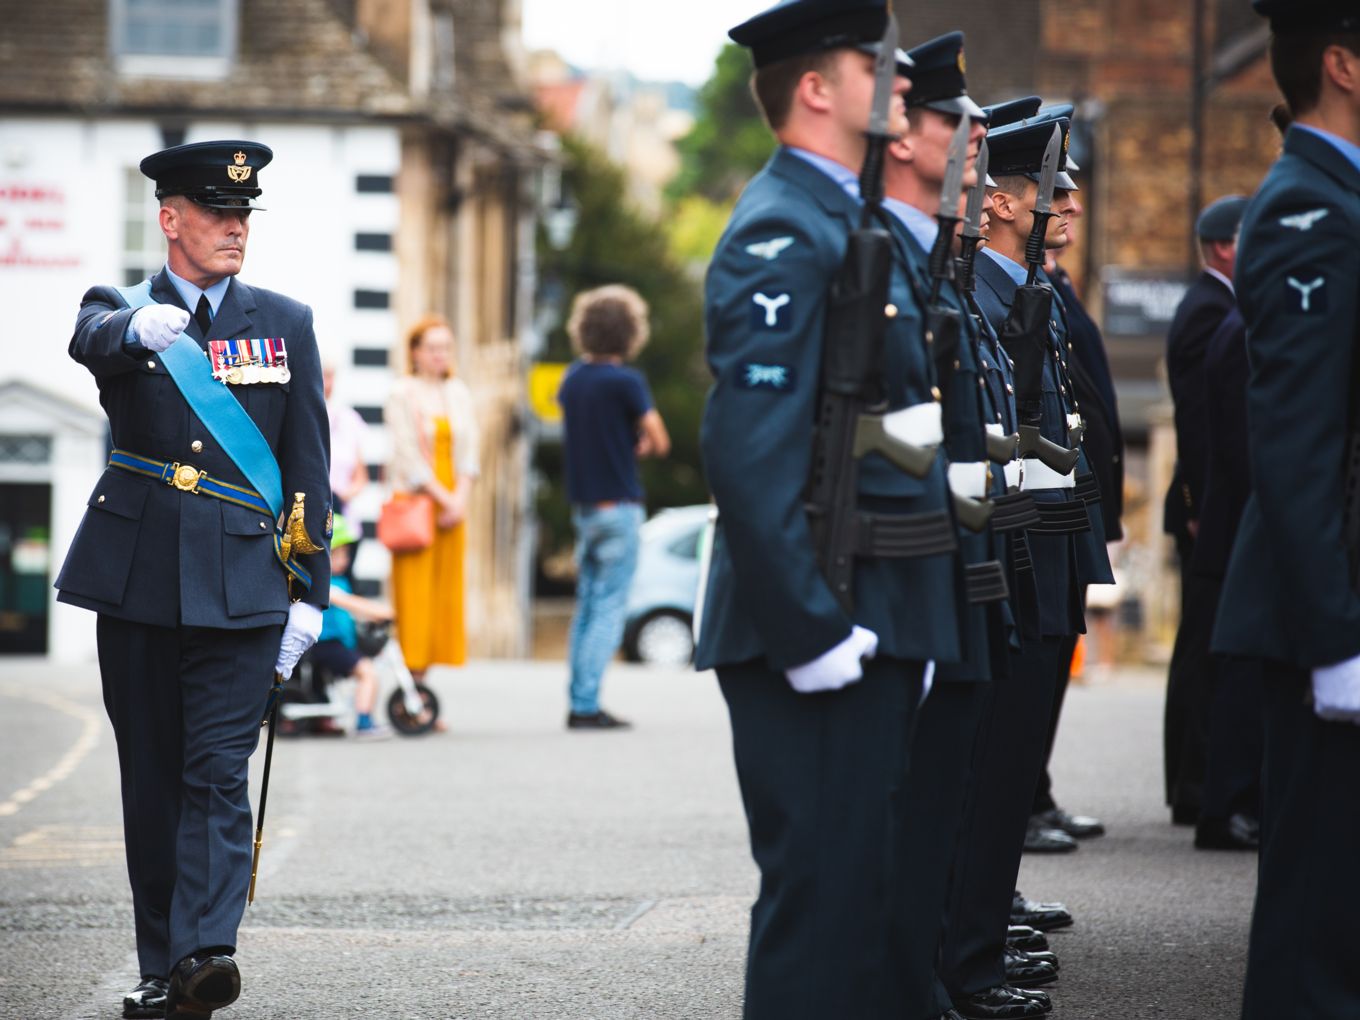 Station Warrant Officer, Warrant Officer Hywel Greening, inspects the parade